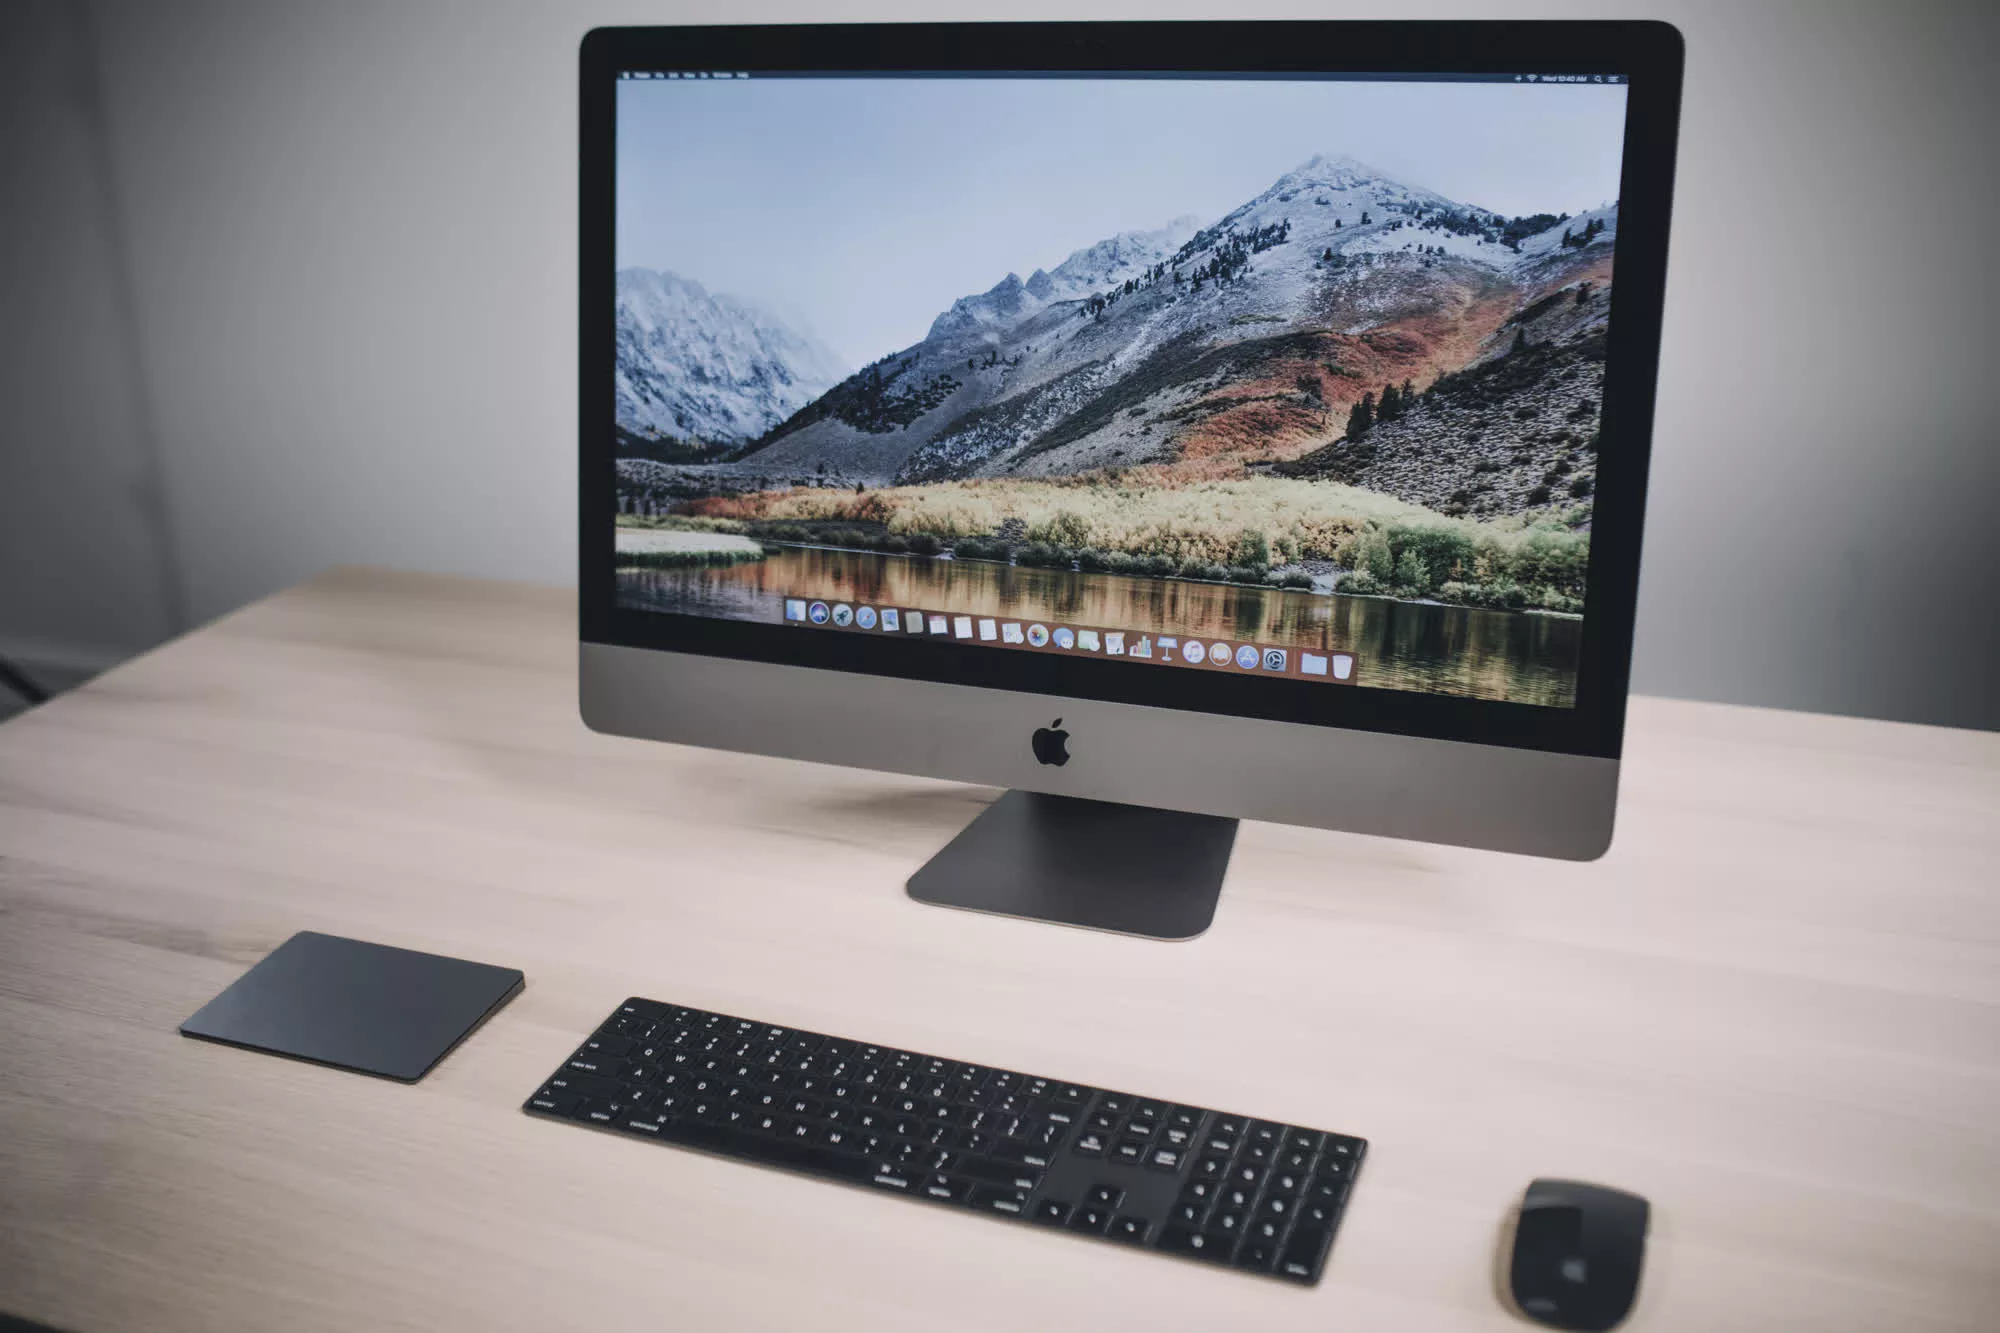 With extra Apple Silicon-powered Macs inbound, the iMac Professional gets discontinued